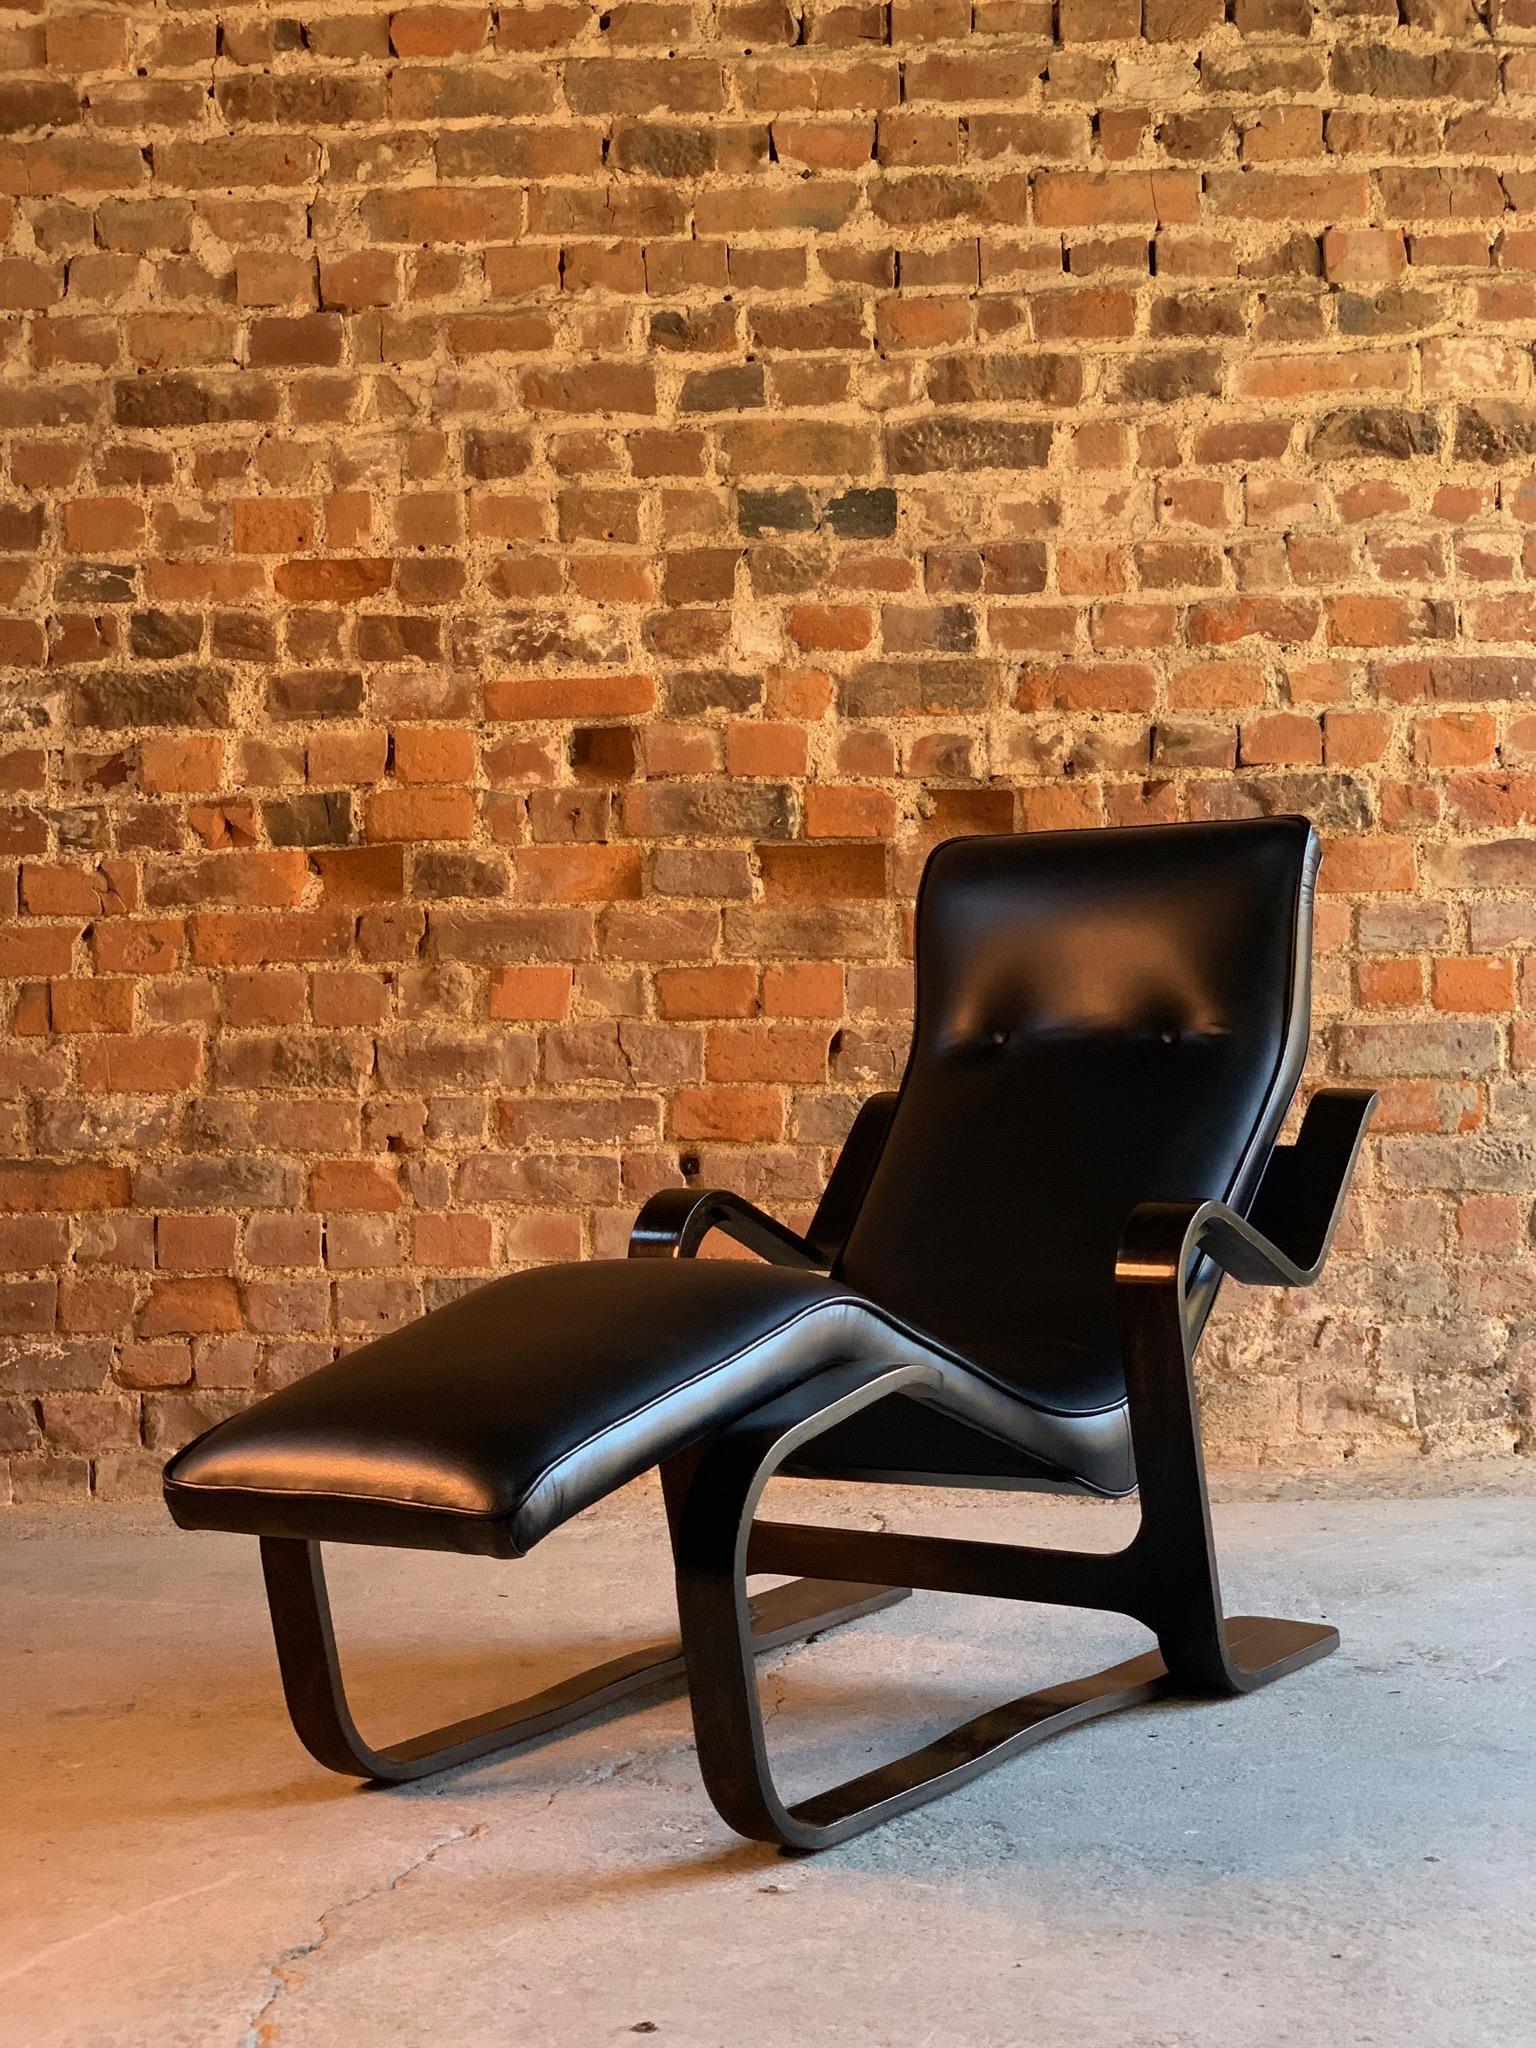 Leather Marcel Breuer Long Chair Chaise Lounge Attr. to Isokon, c 1970 Bauhaus Midcent